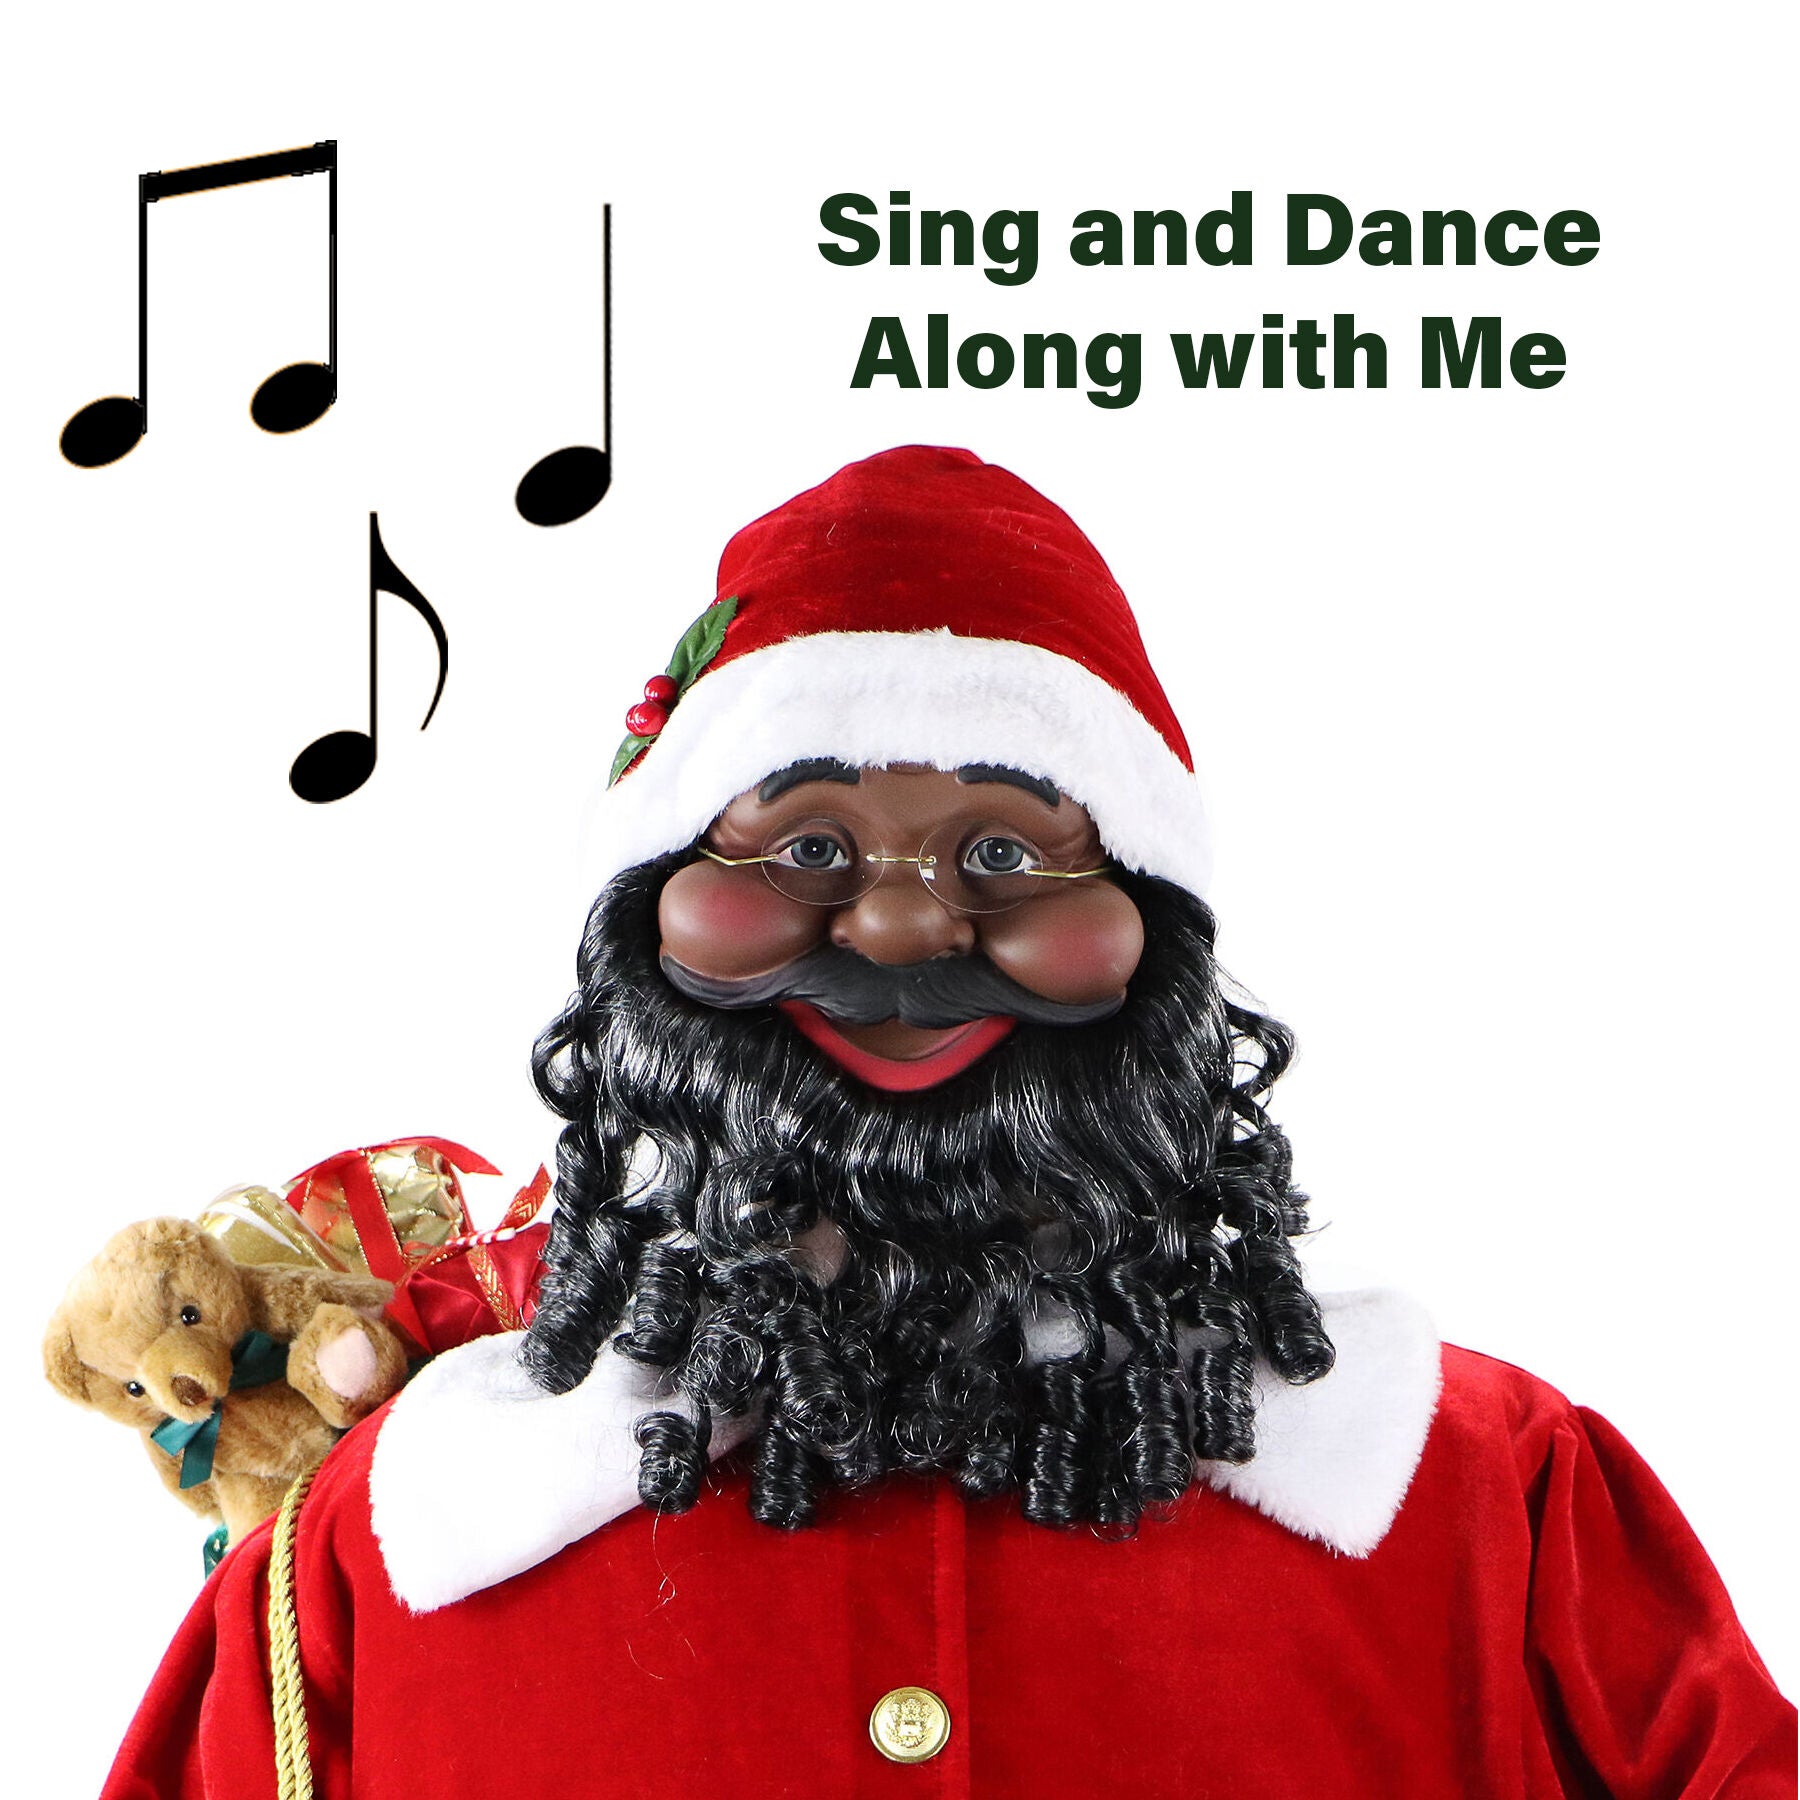 Fraser Hill Farm -  58-In. African American Dancing Santa with Naughty & Nice List, Life-Size Motion-Activated Christmas Animatronic